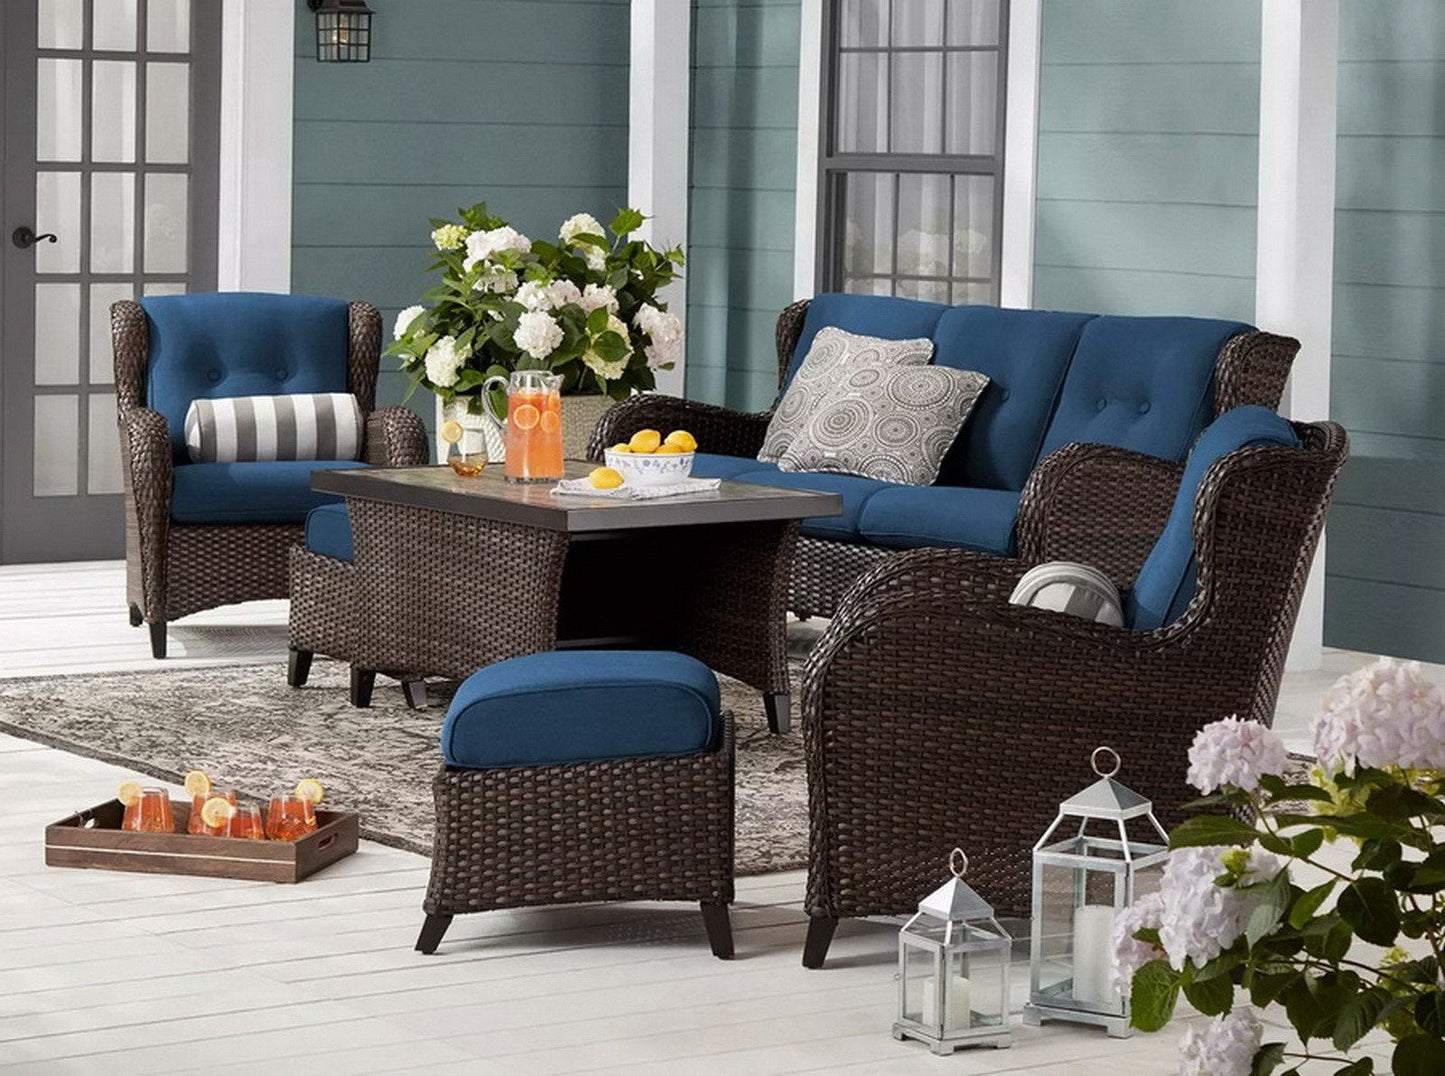 All Weather Wicker Outdoor Furniture Seating Set Blue Cushions 2 Chairs Ottomans